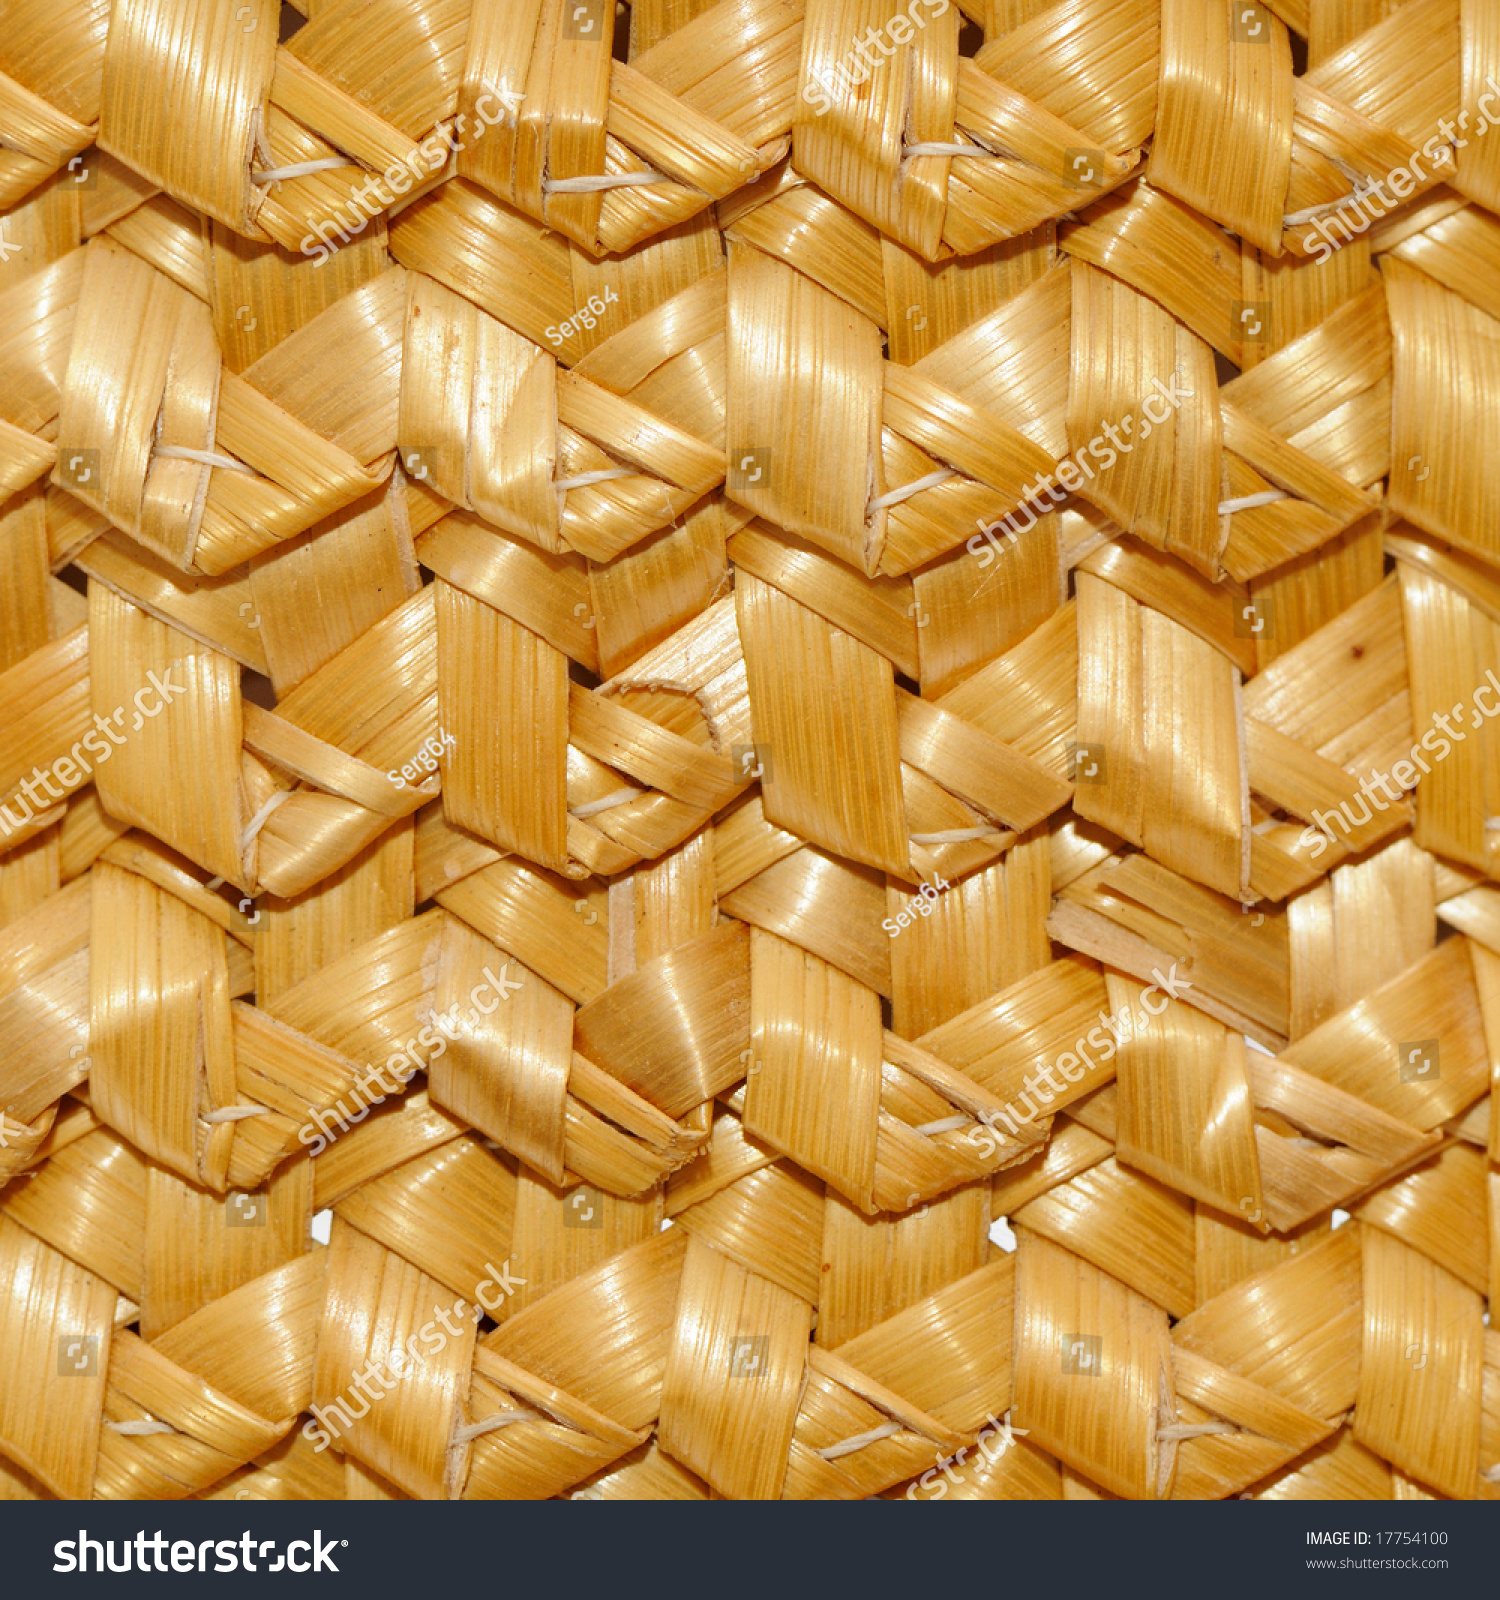 Straw Texture Background Stock Photo (Royalty Free) 17754100 ...